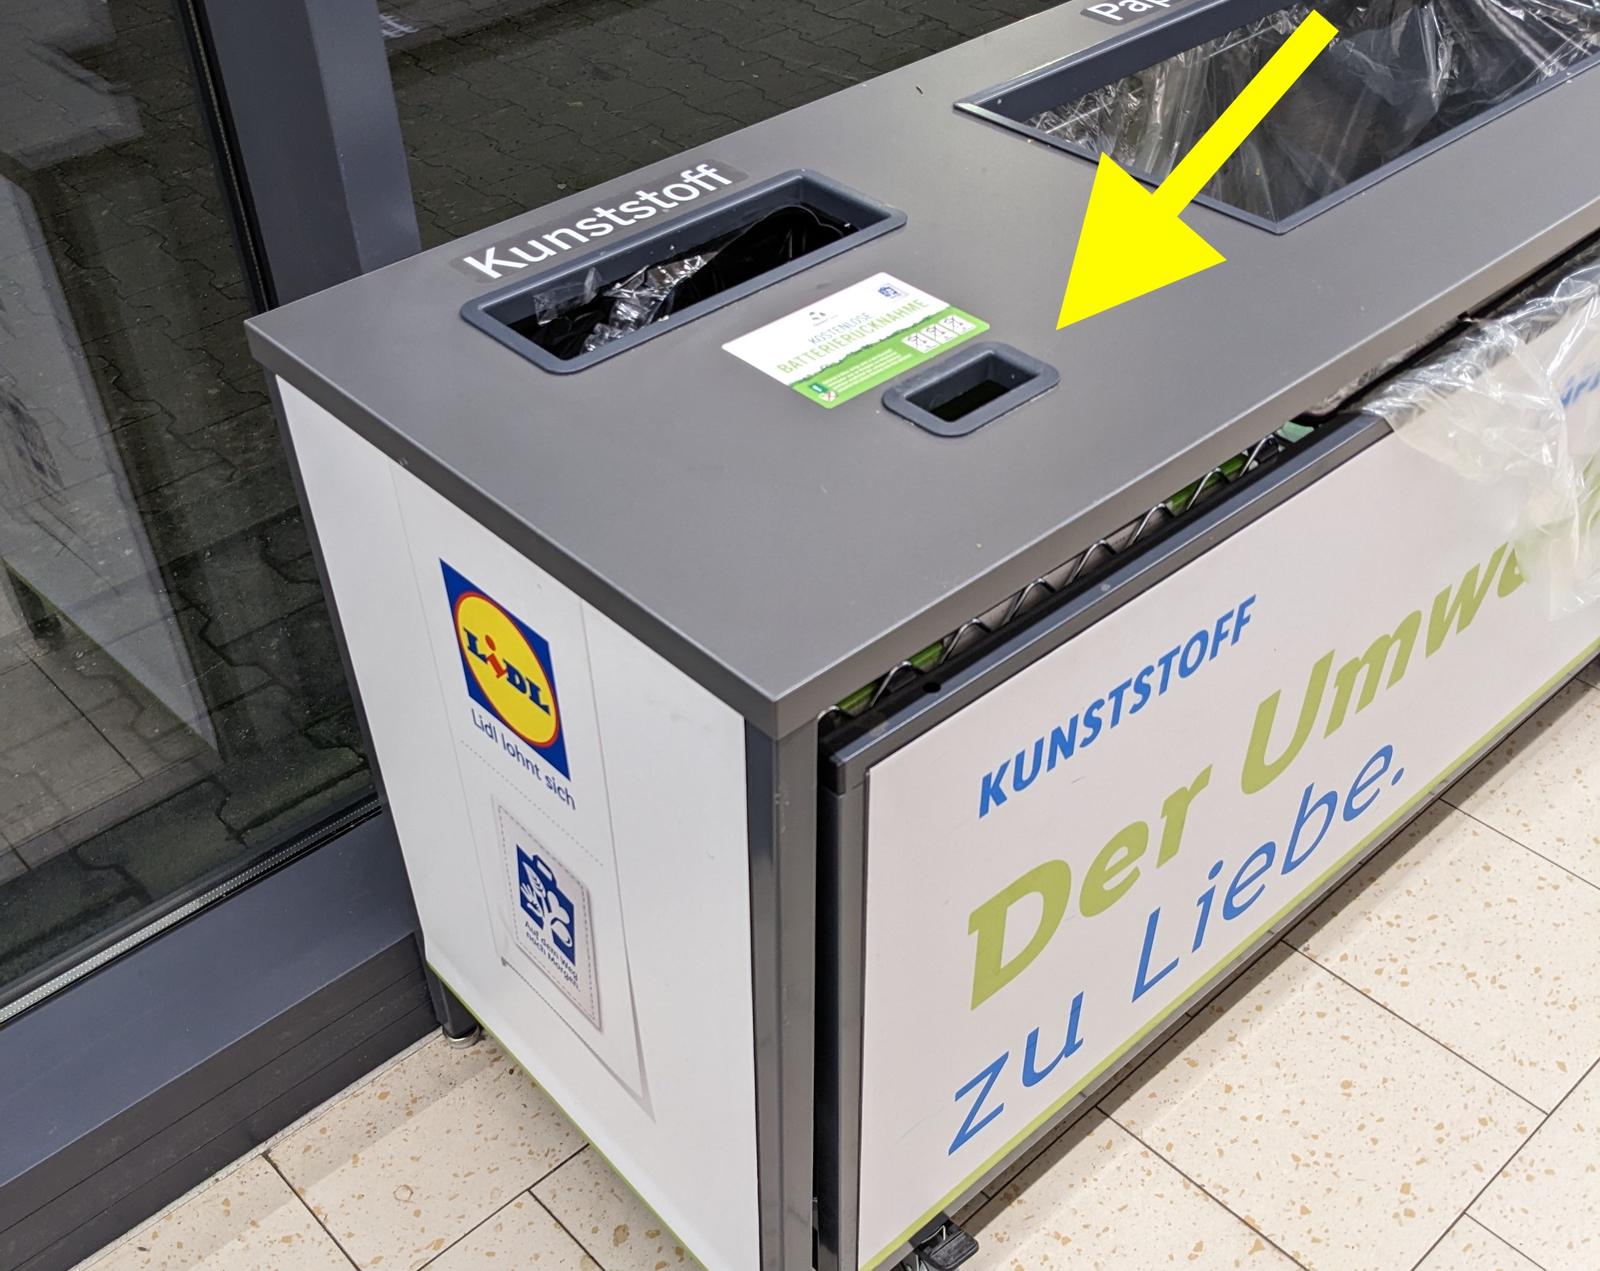 Battery recycling bin at Lidl